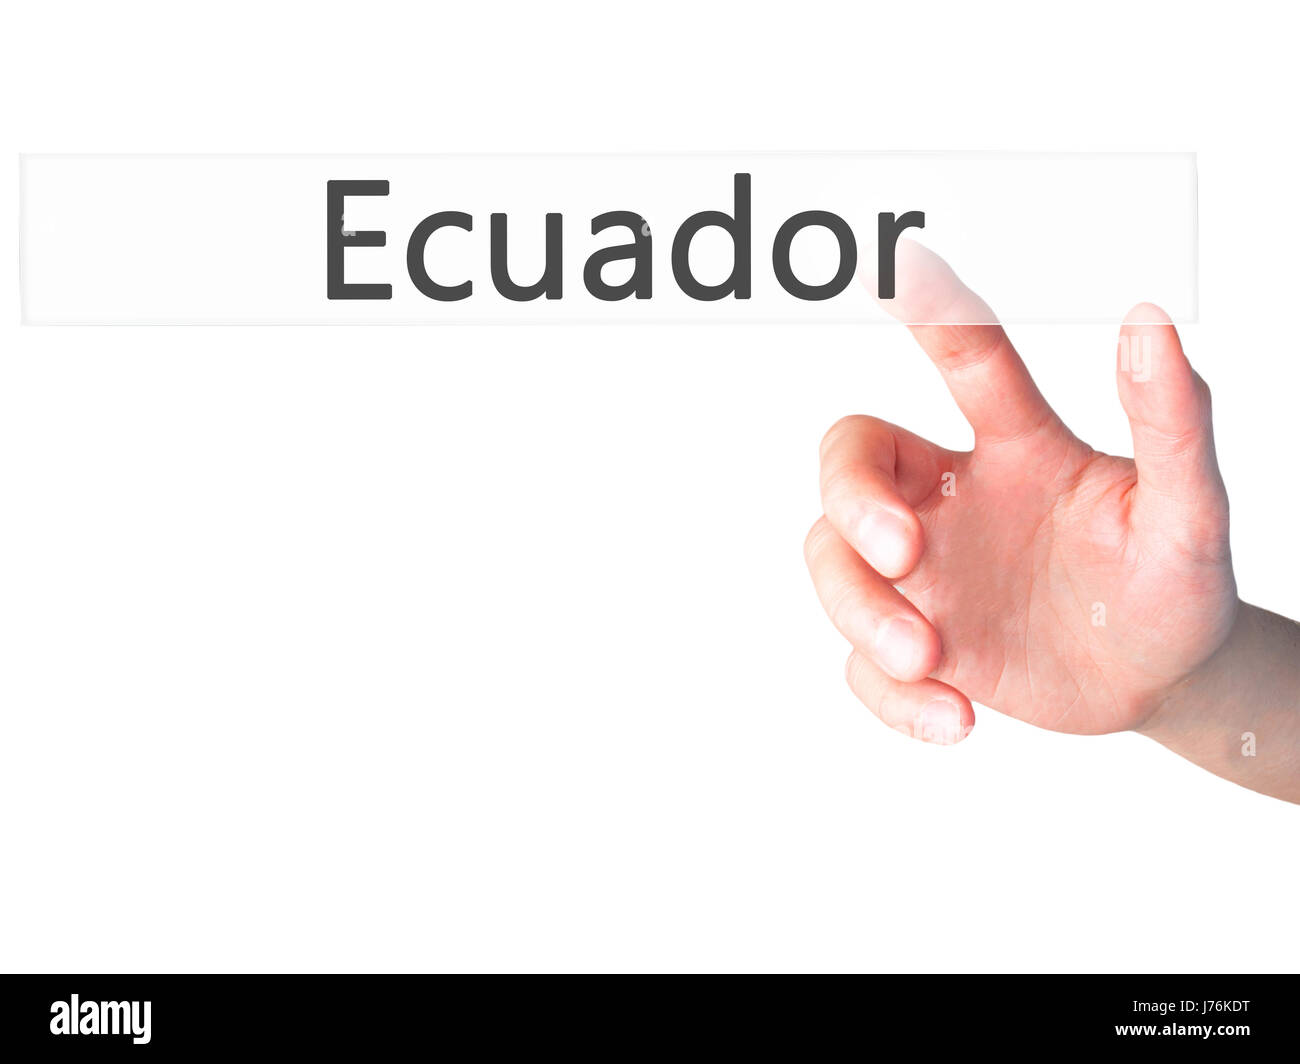 Ecuador - Hand pressing a button on blurred background concept . Business, technology, internet concept. Stock Photo Stock Photo